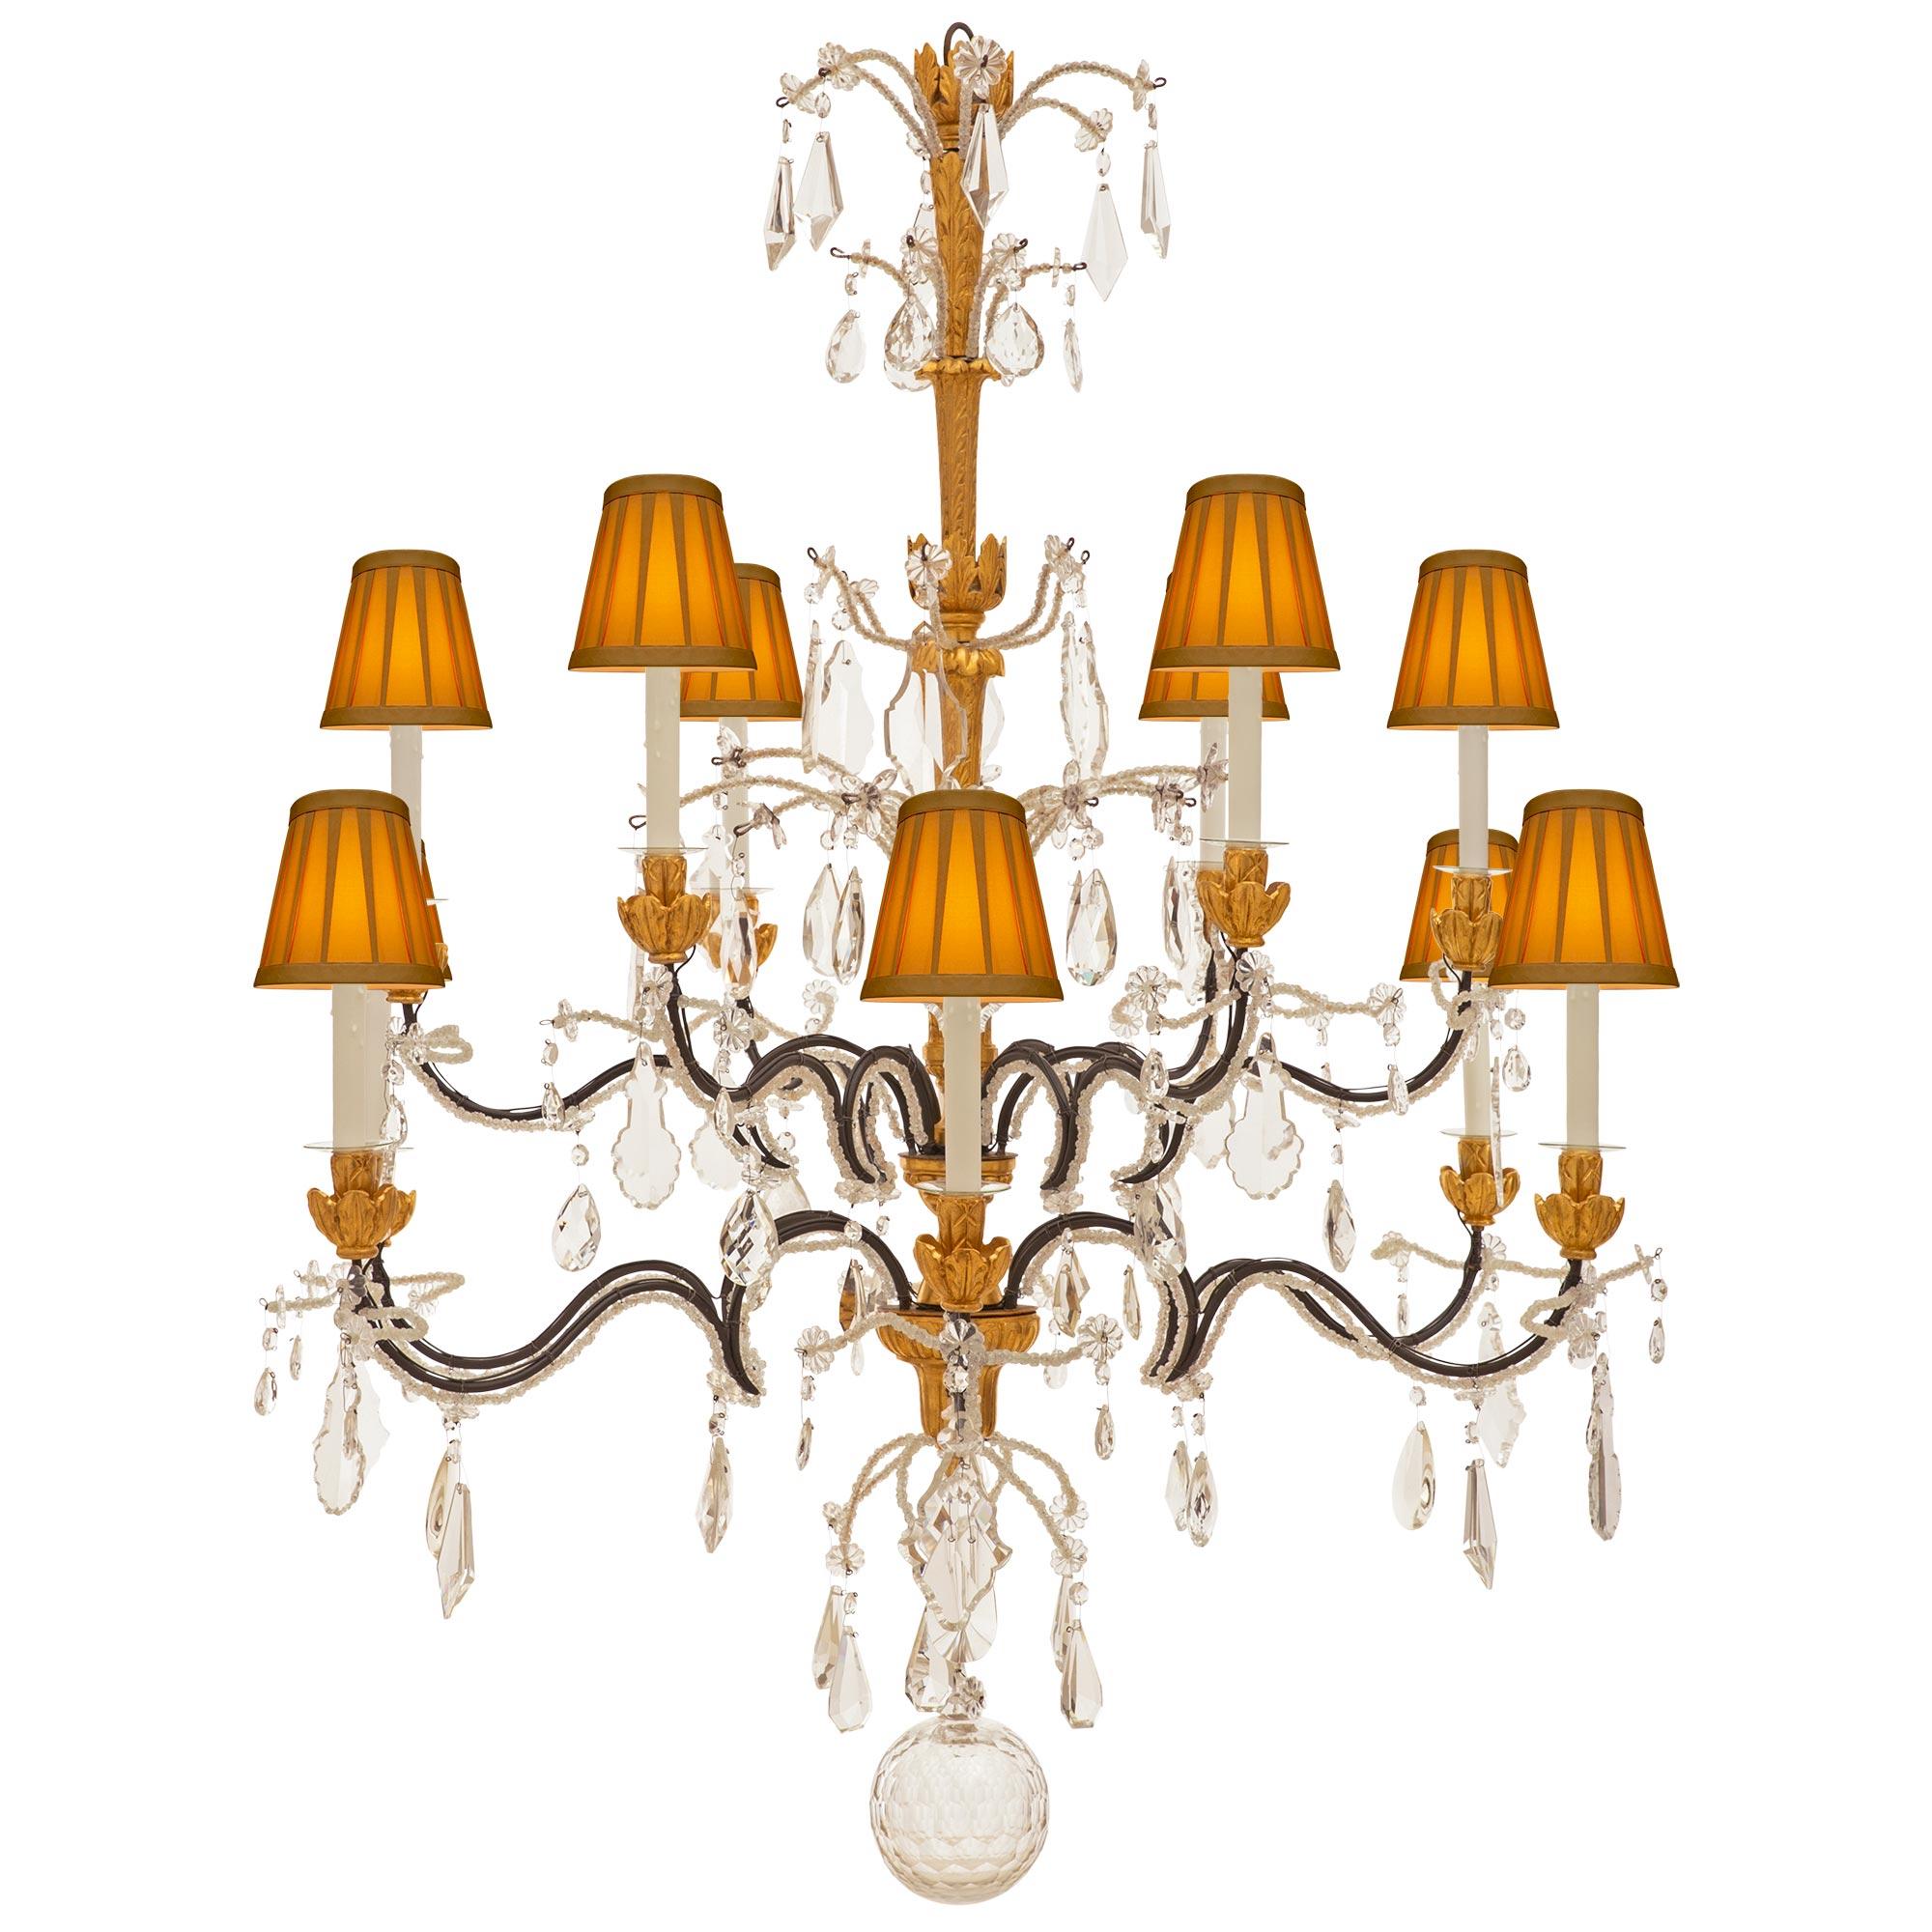 Italian 19th Century Genovese St. Giltwood, Wrought Iron & Crystal Chandelier